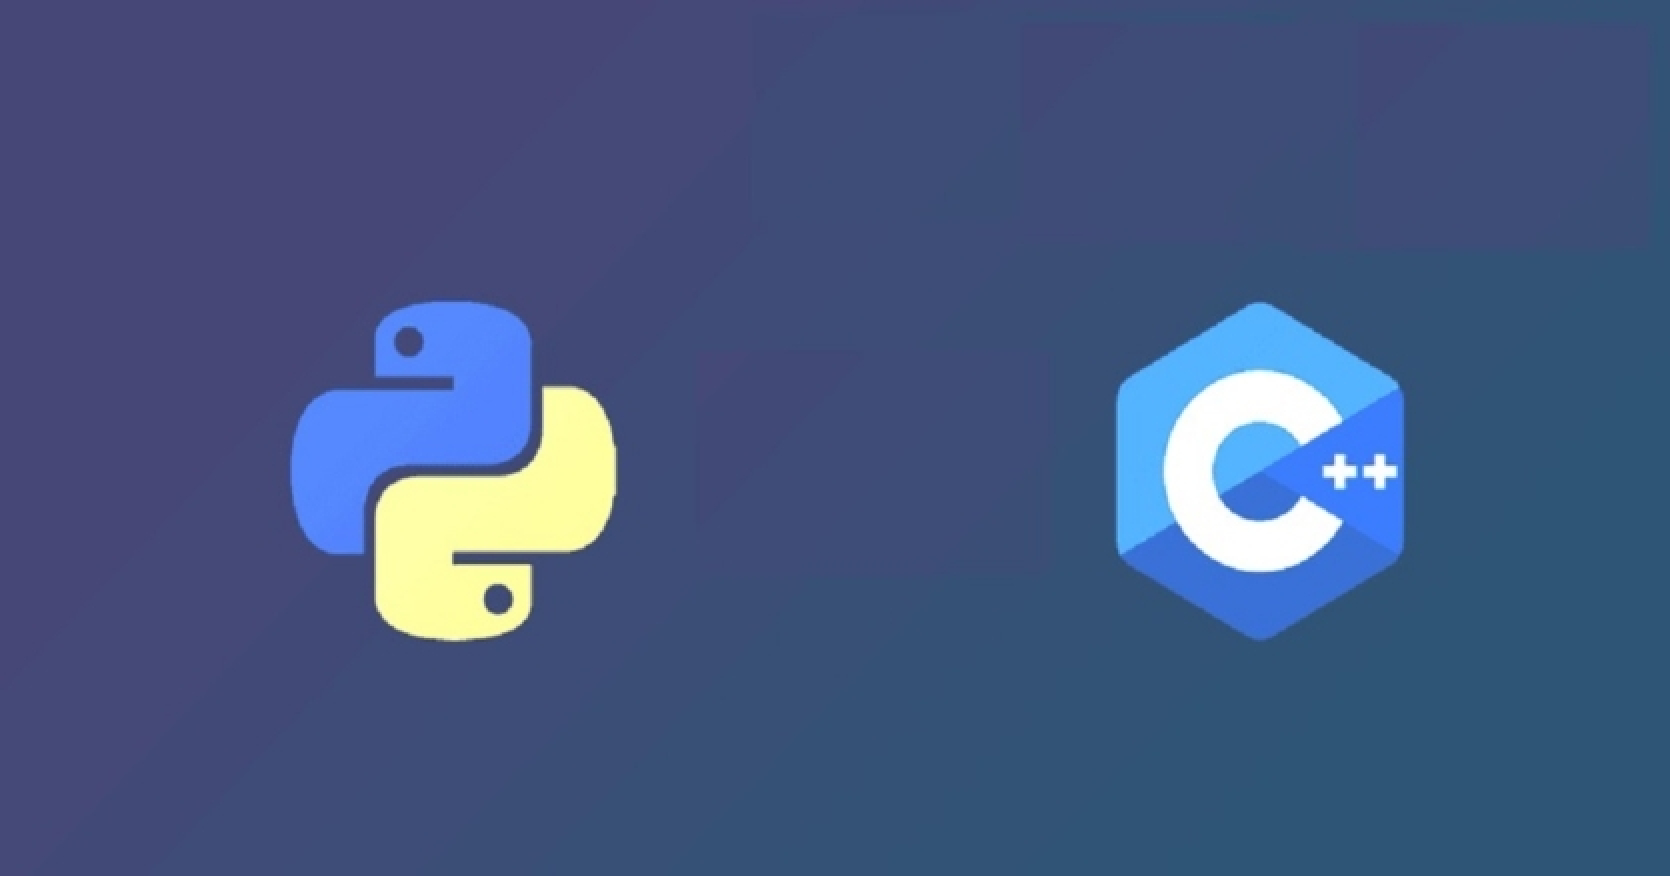 Python and C++ are at the top of the IT market in terms of number of offers